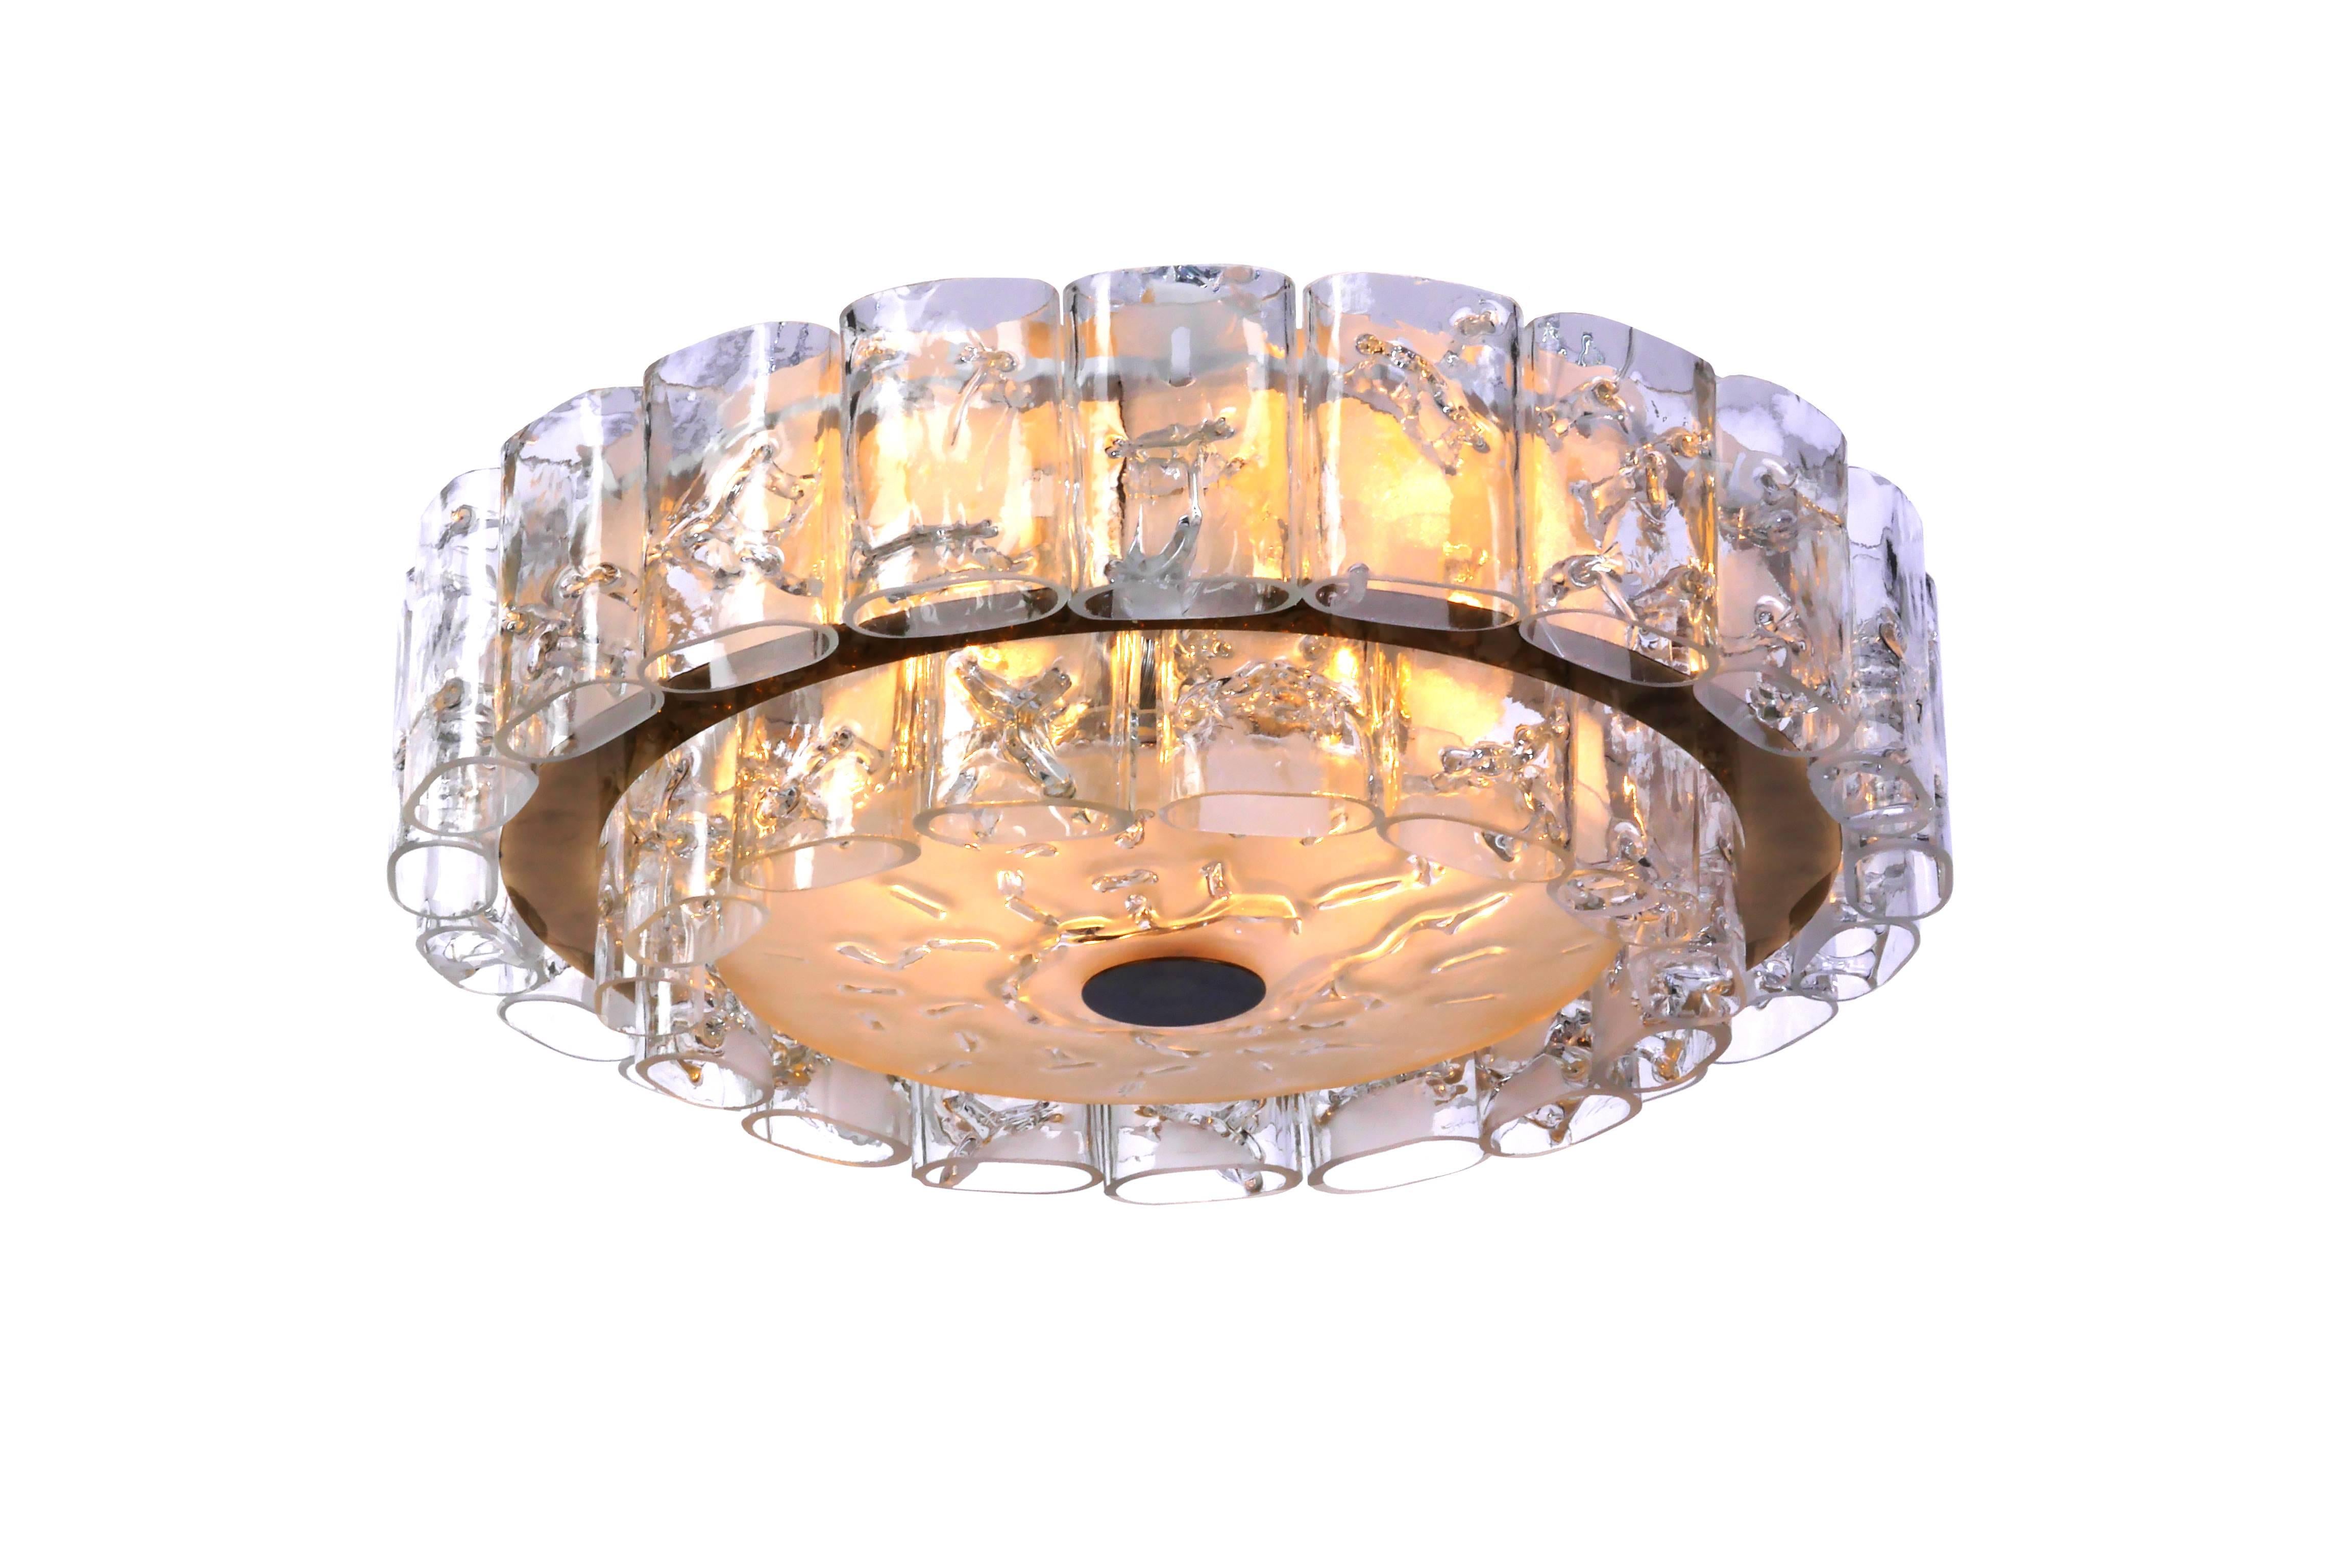 This exceptional 1960s Mid-Century Modernist flush mount was designed by Doria. It features a circular form with two-tiers of Murano glass tubes and brass detailing. It is in excellent condition and has been newly rewired.

Made in  Germany        